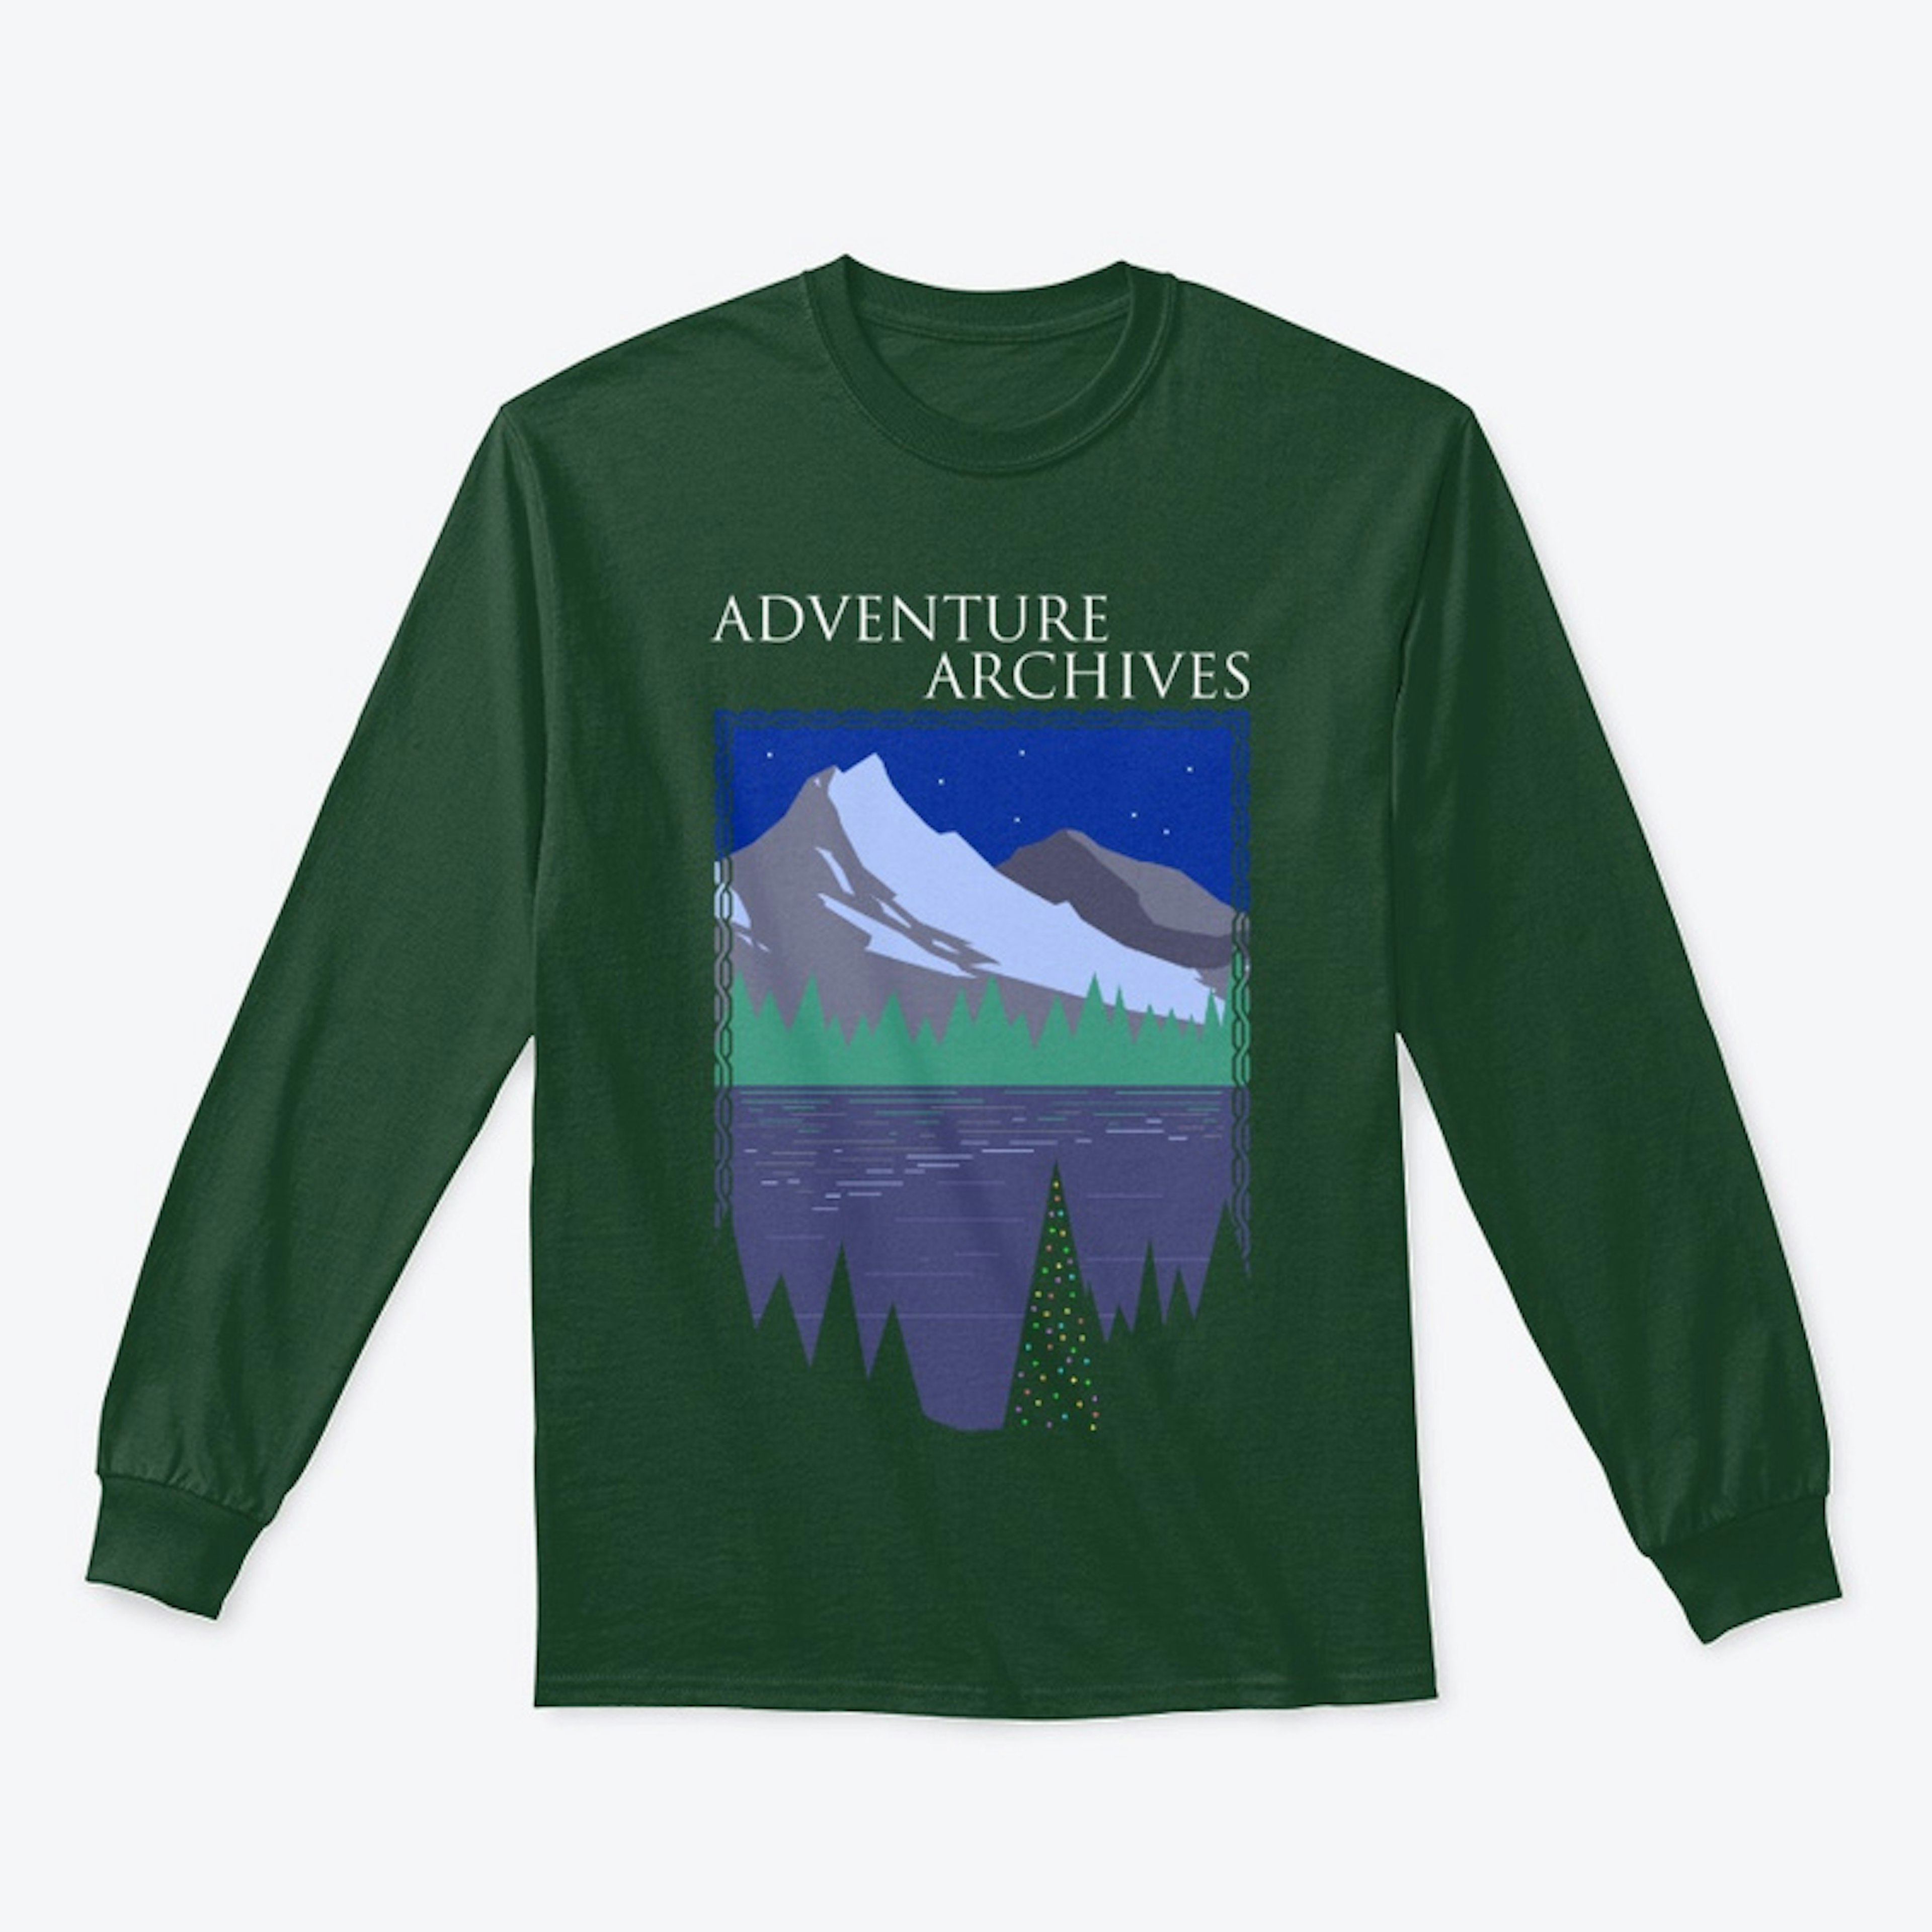 Adventure Archives Holiday 2021!